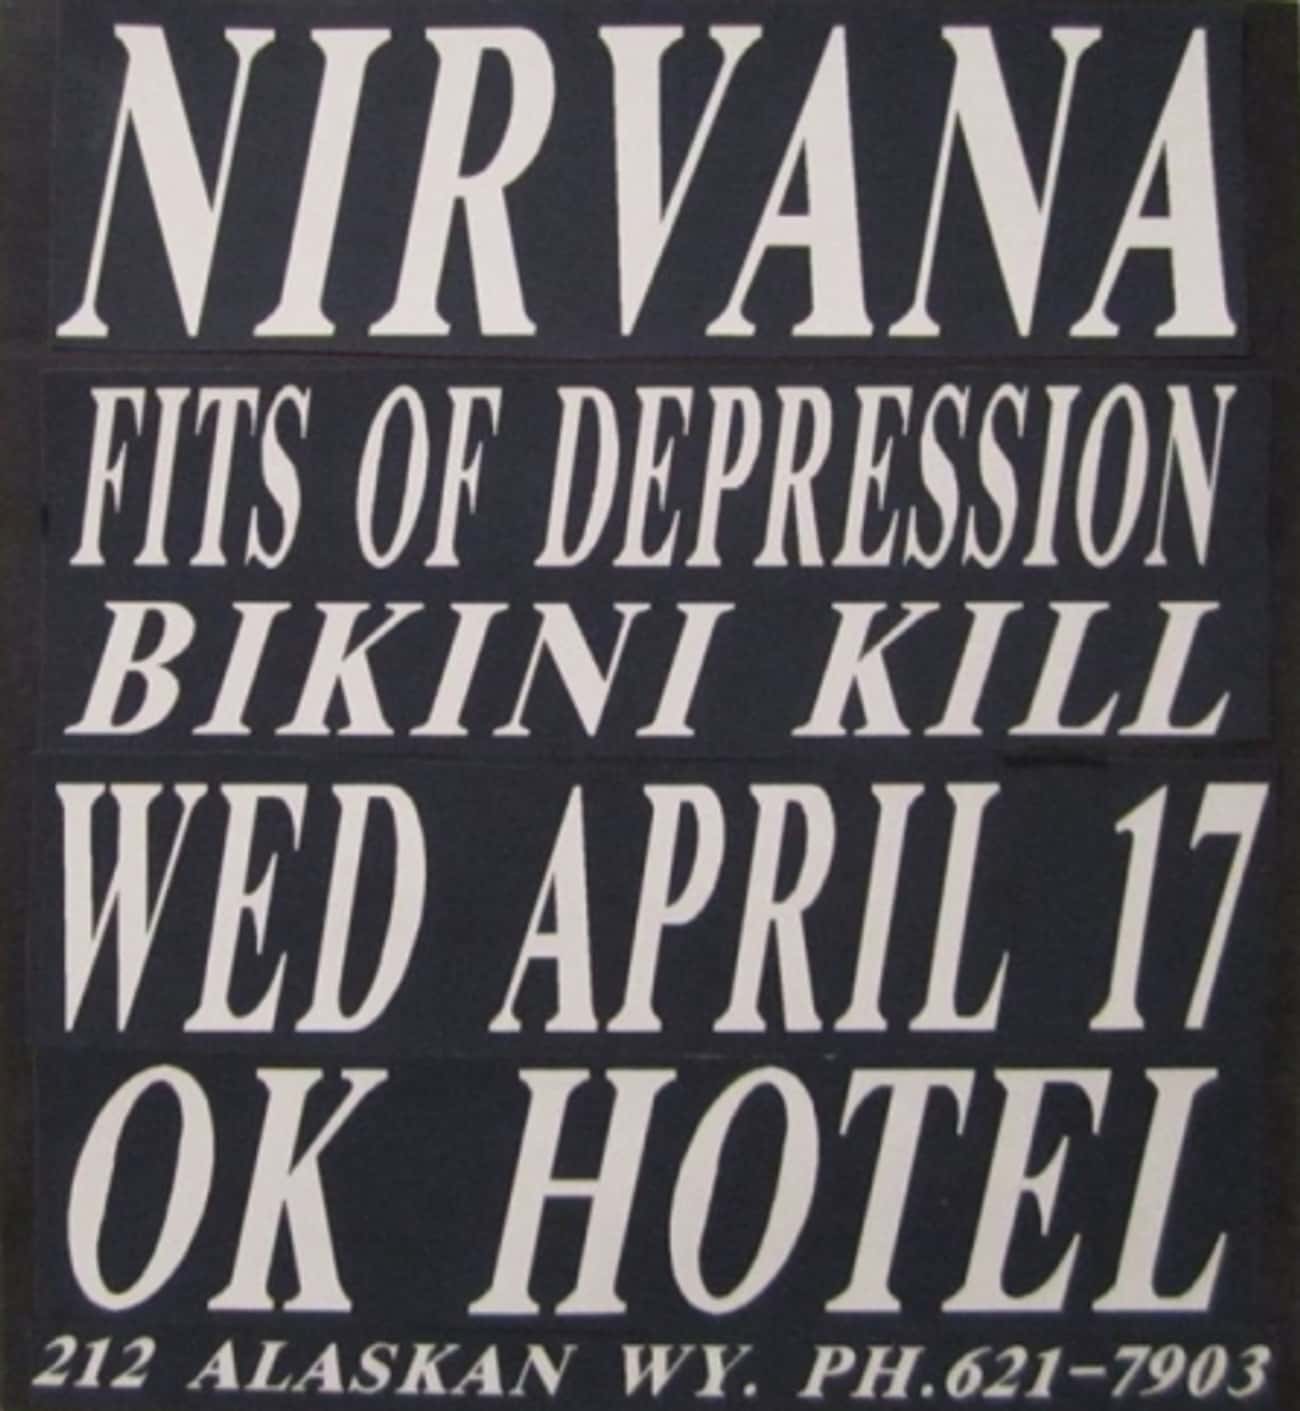 Nirvana Unveiled The First In-Progress Version Of 'Teen Spirit' To A Live Audience On April 17, 1991 